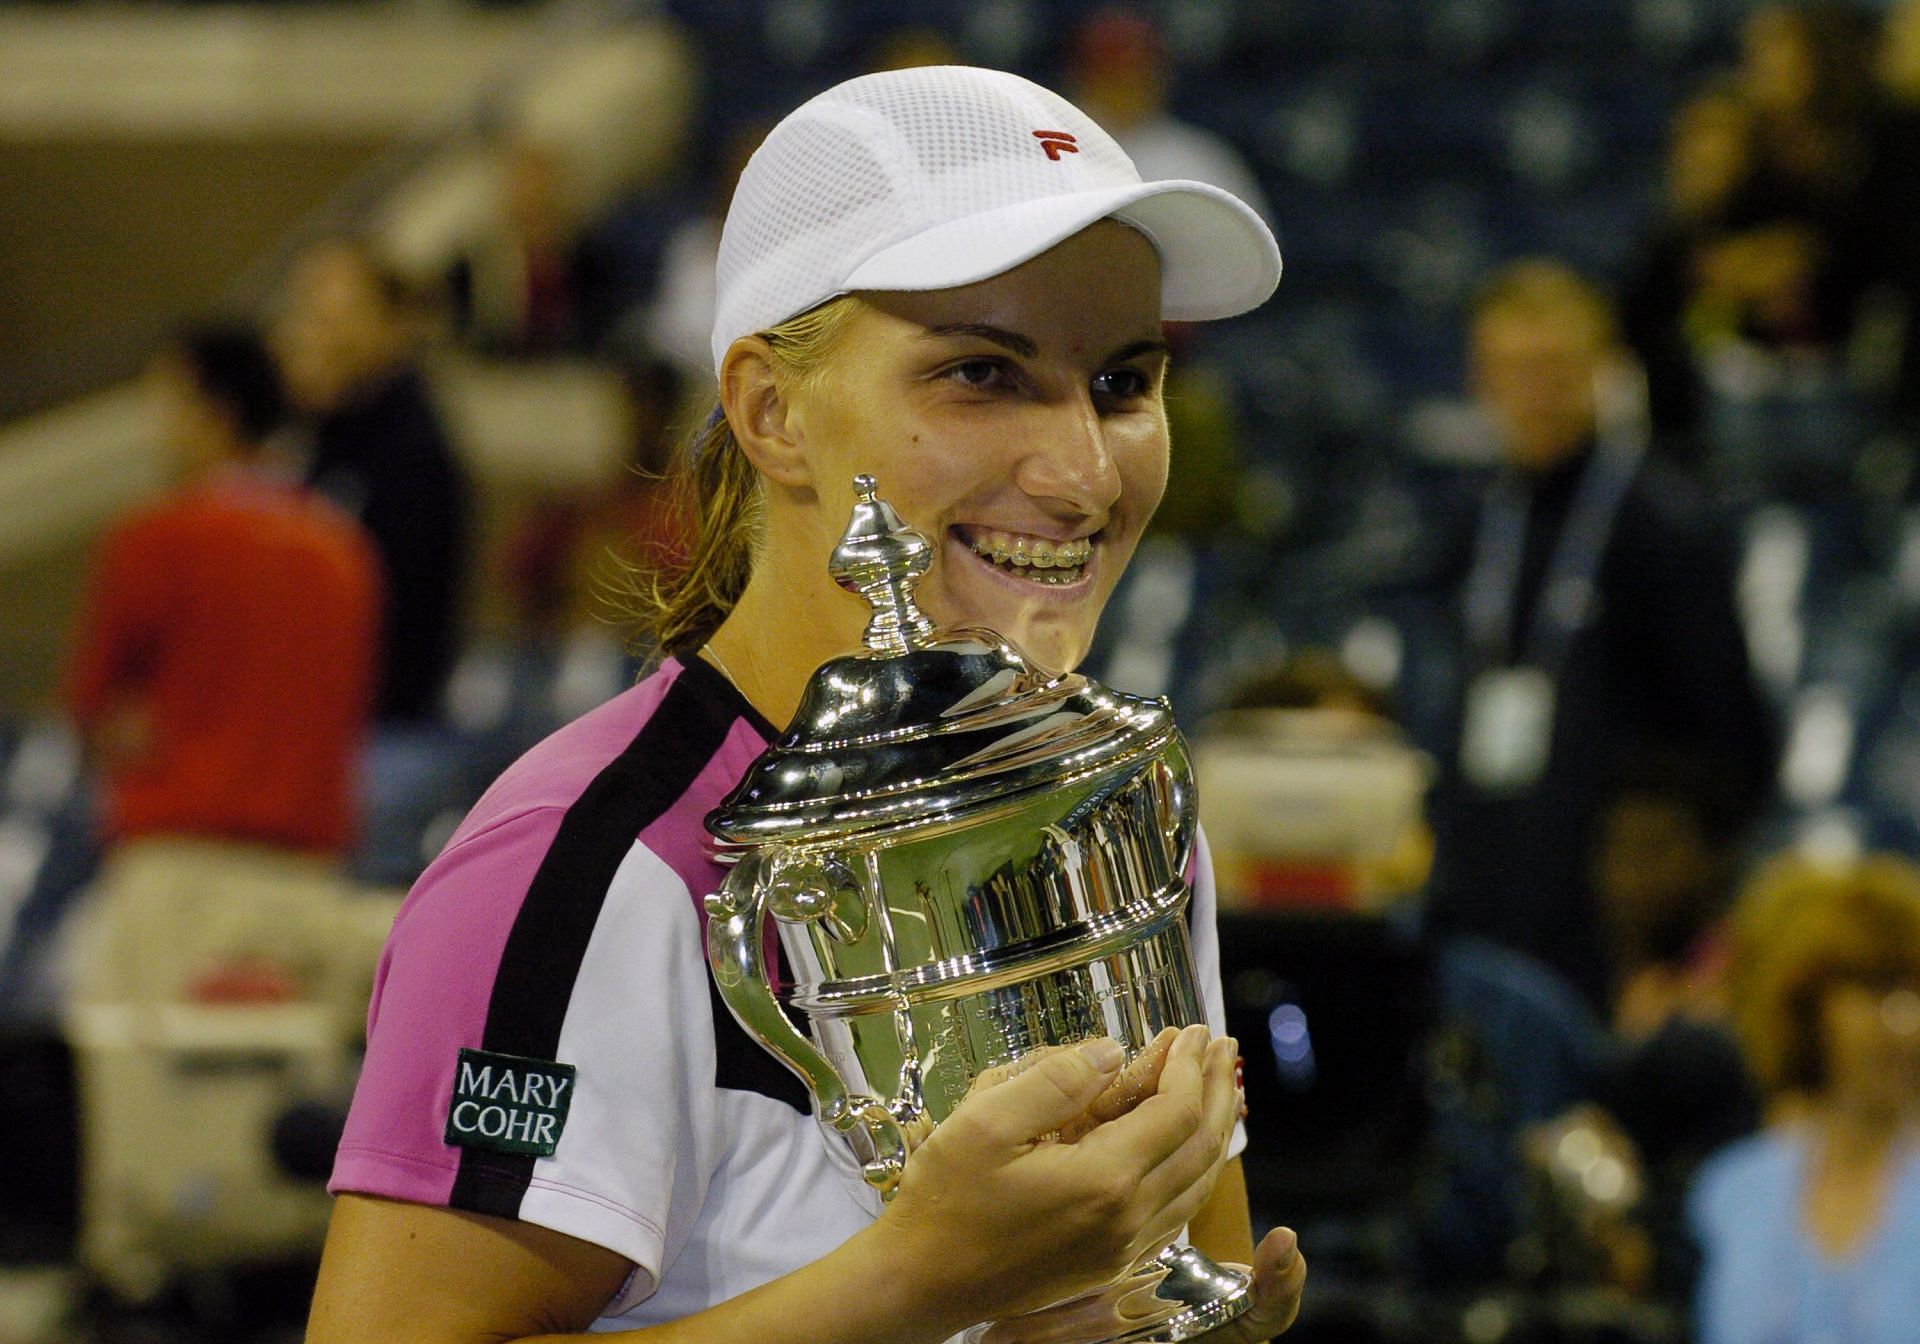 Kuznetsova won her first Grand Slam title at the US Open in 2004